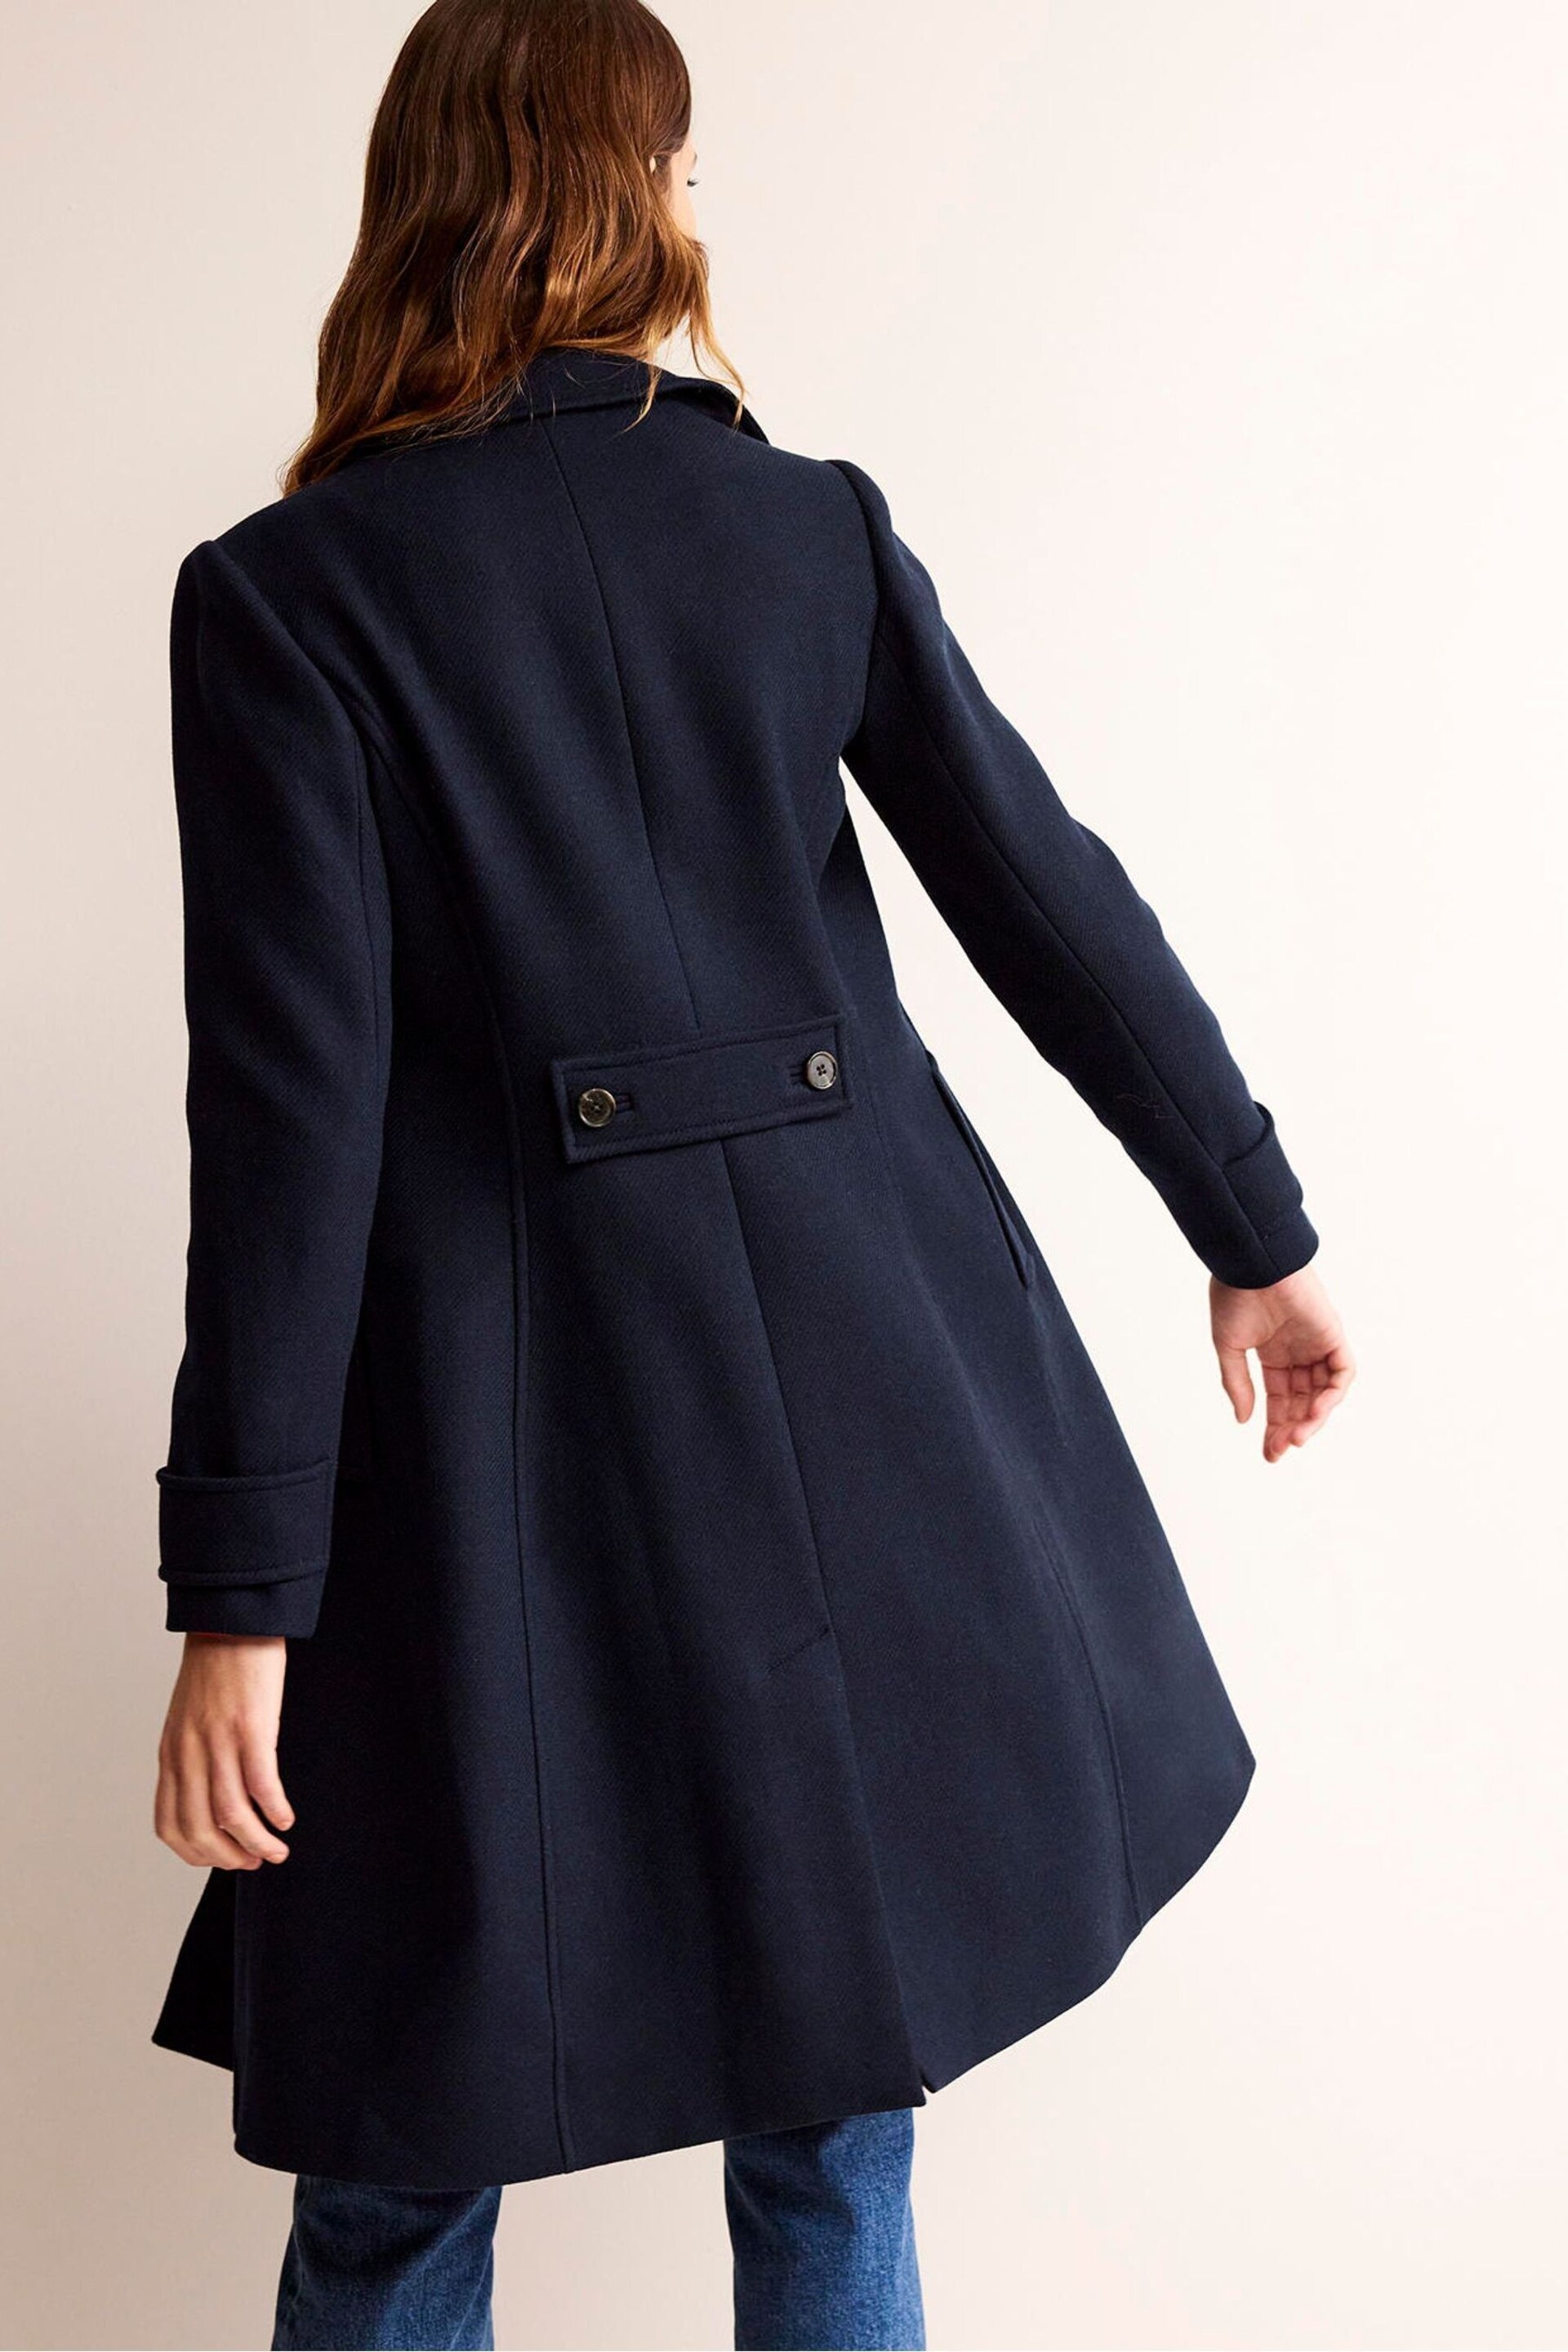 Boden Blue Durham Wool Collared Coat - Image 2 of 5